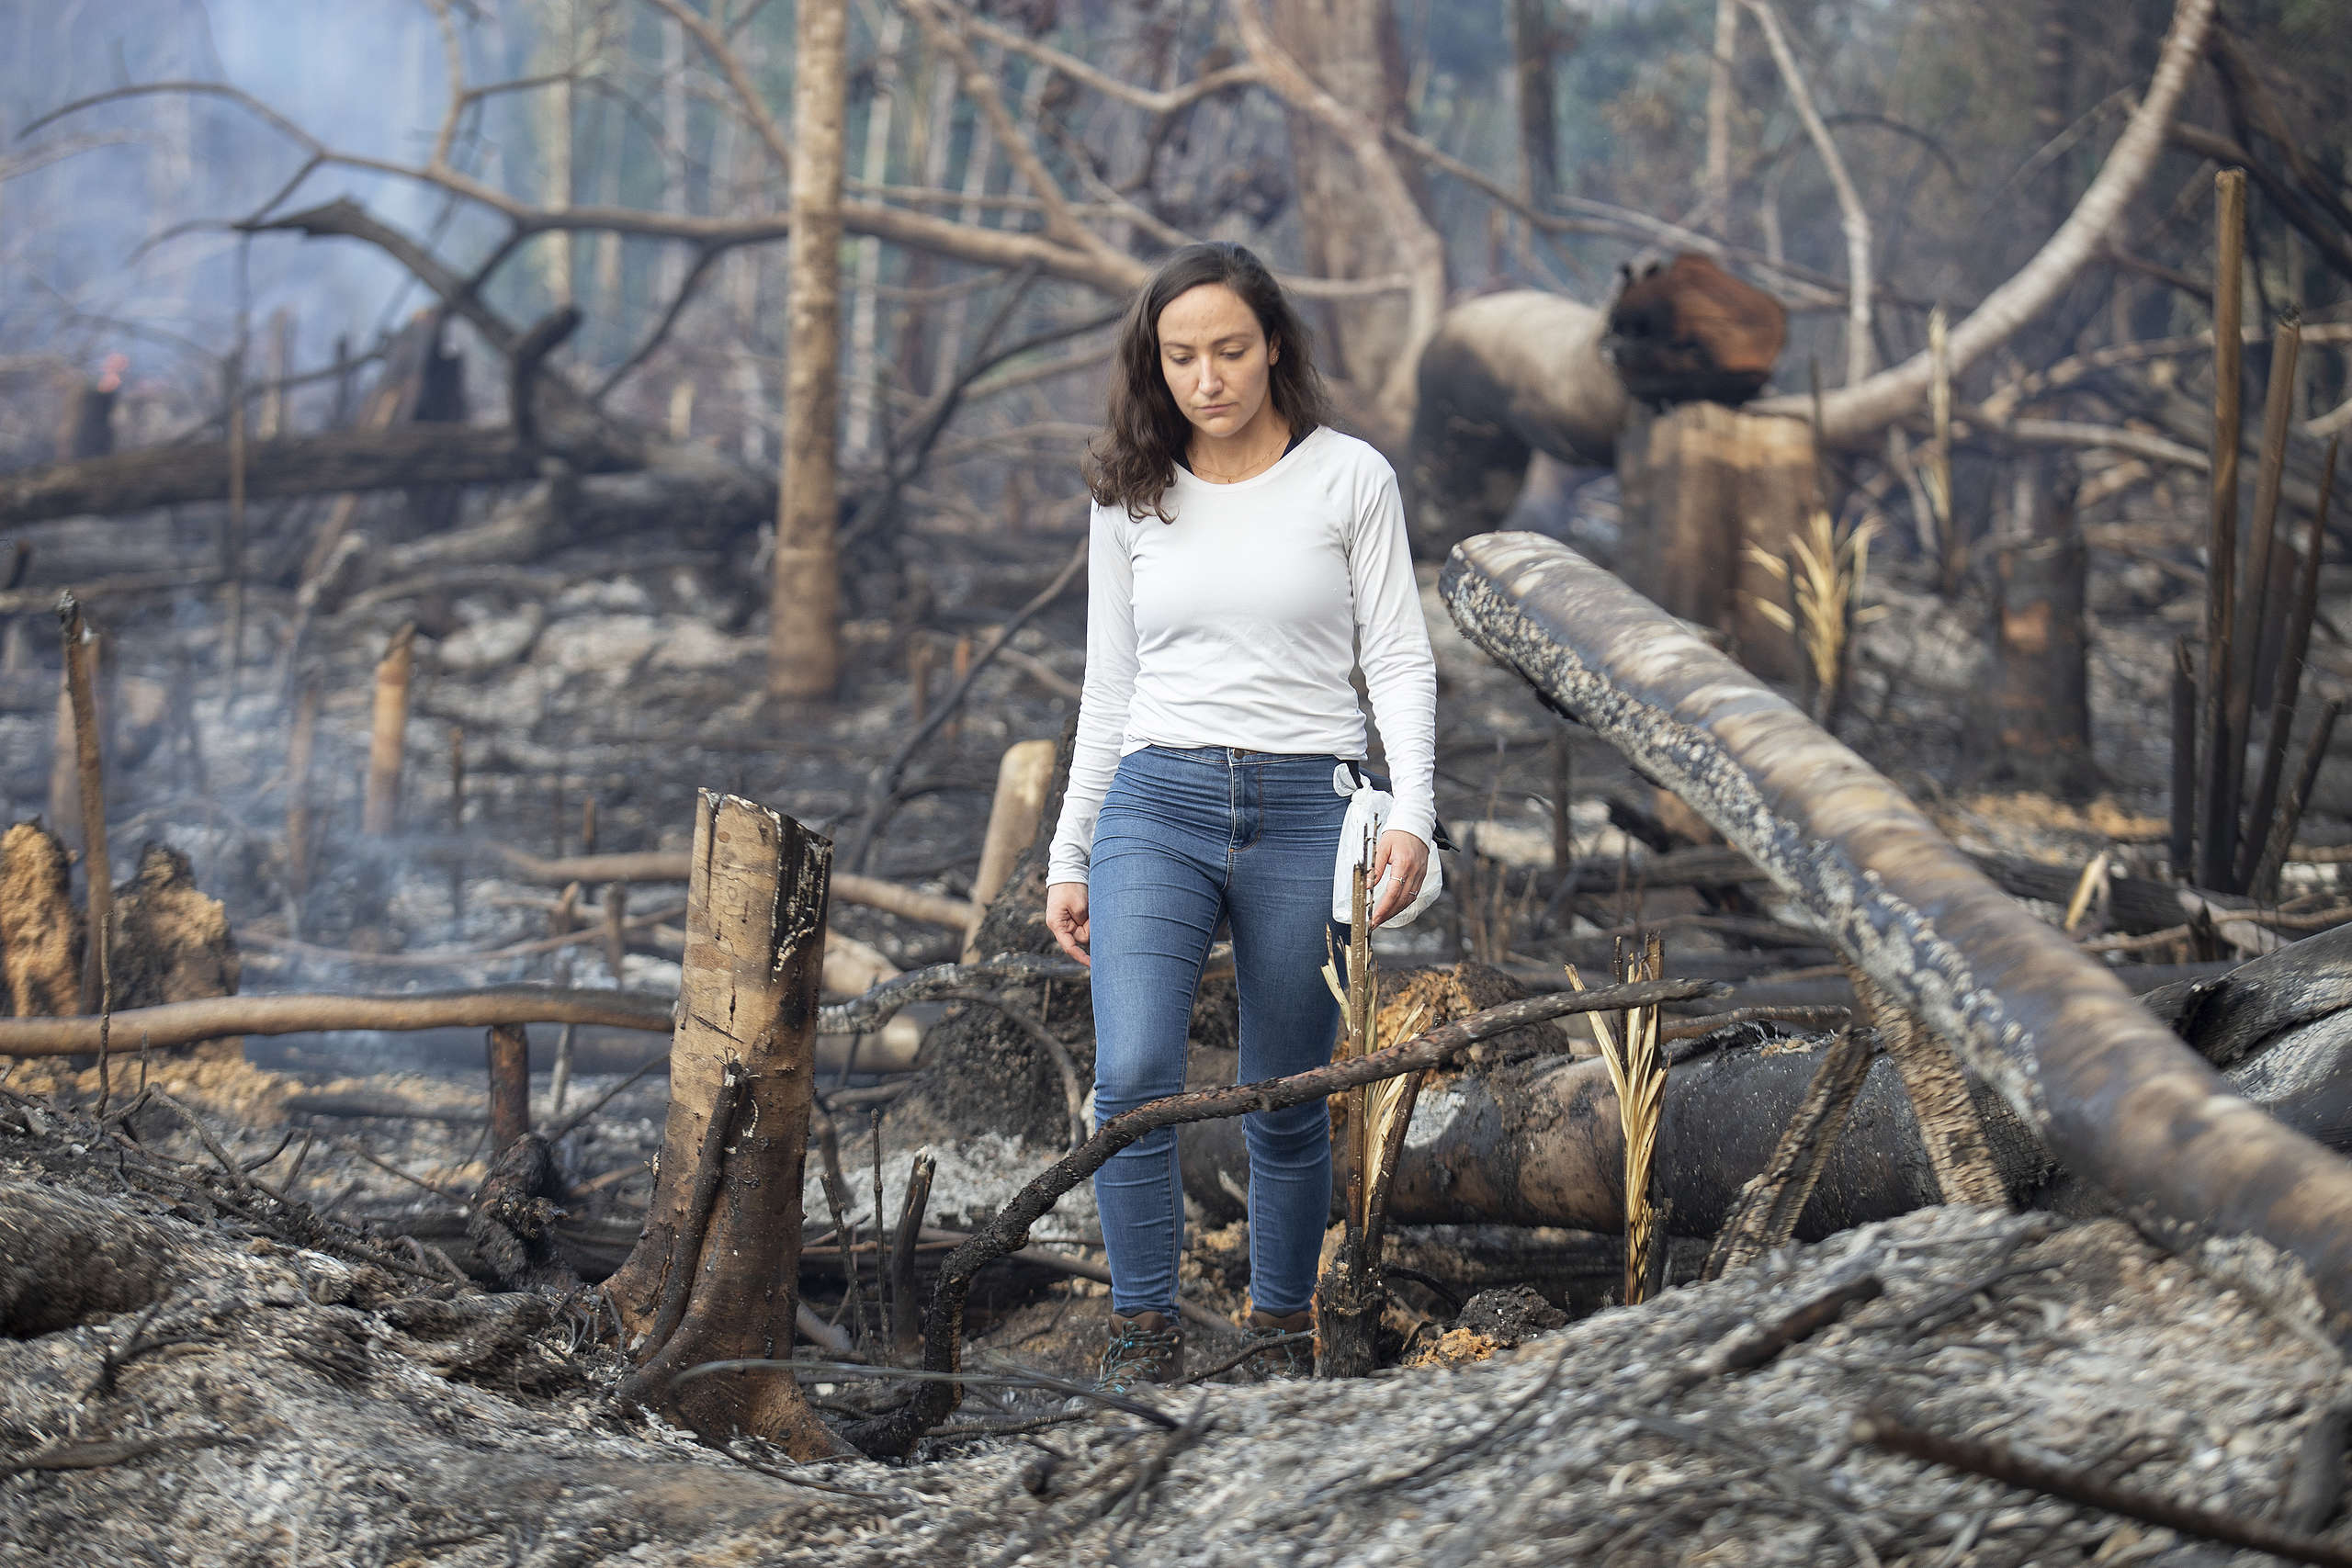 Greenpeace Brazil campaigner Cristiane Mazzetti walks through a recently burned area in the south of the Amazon.